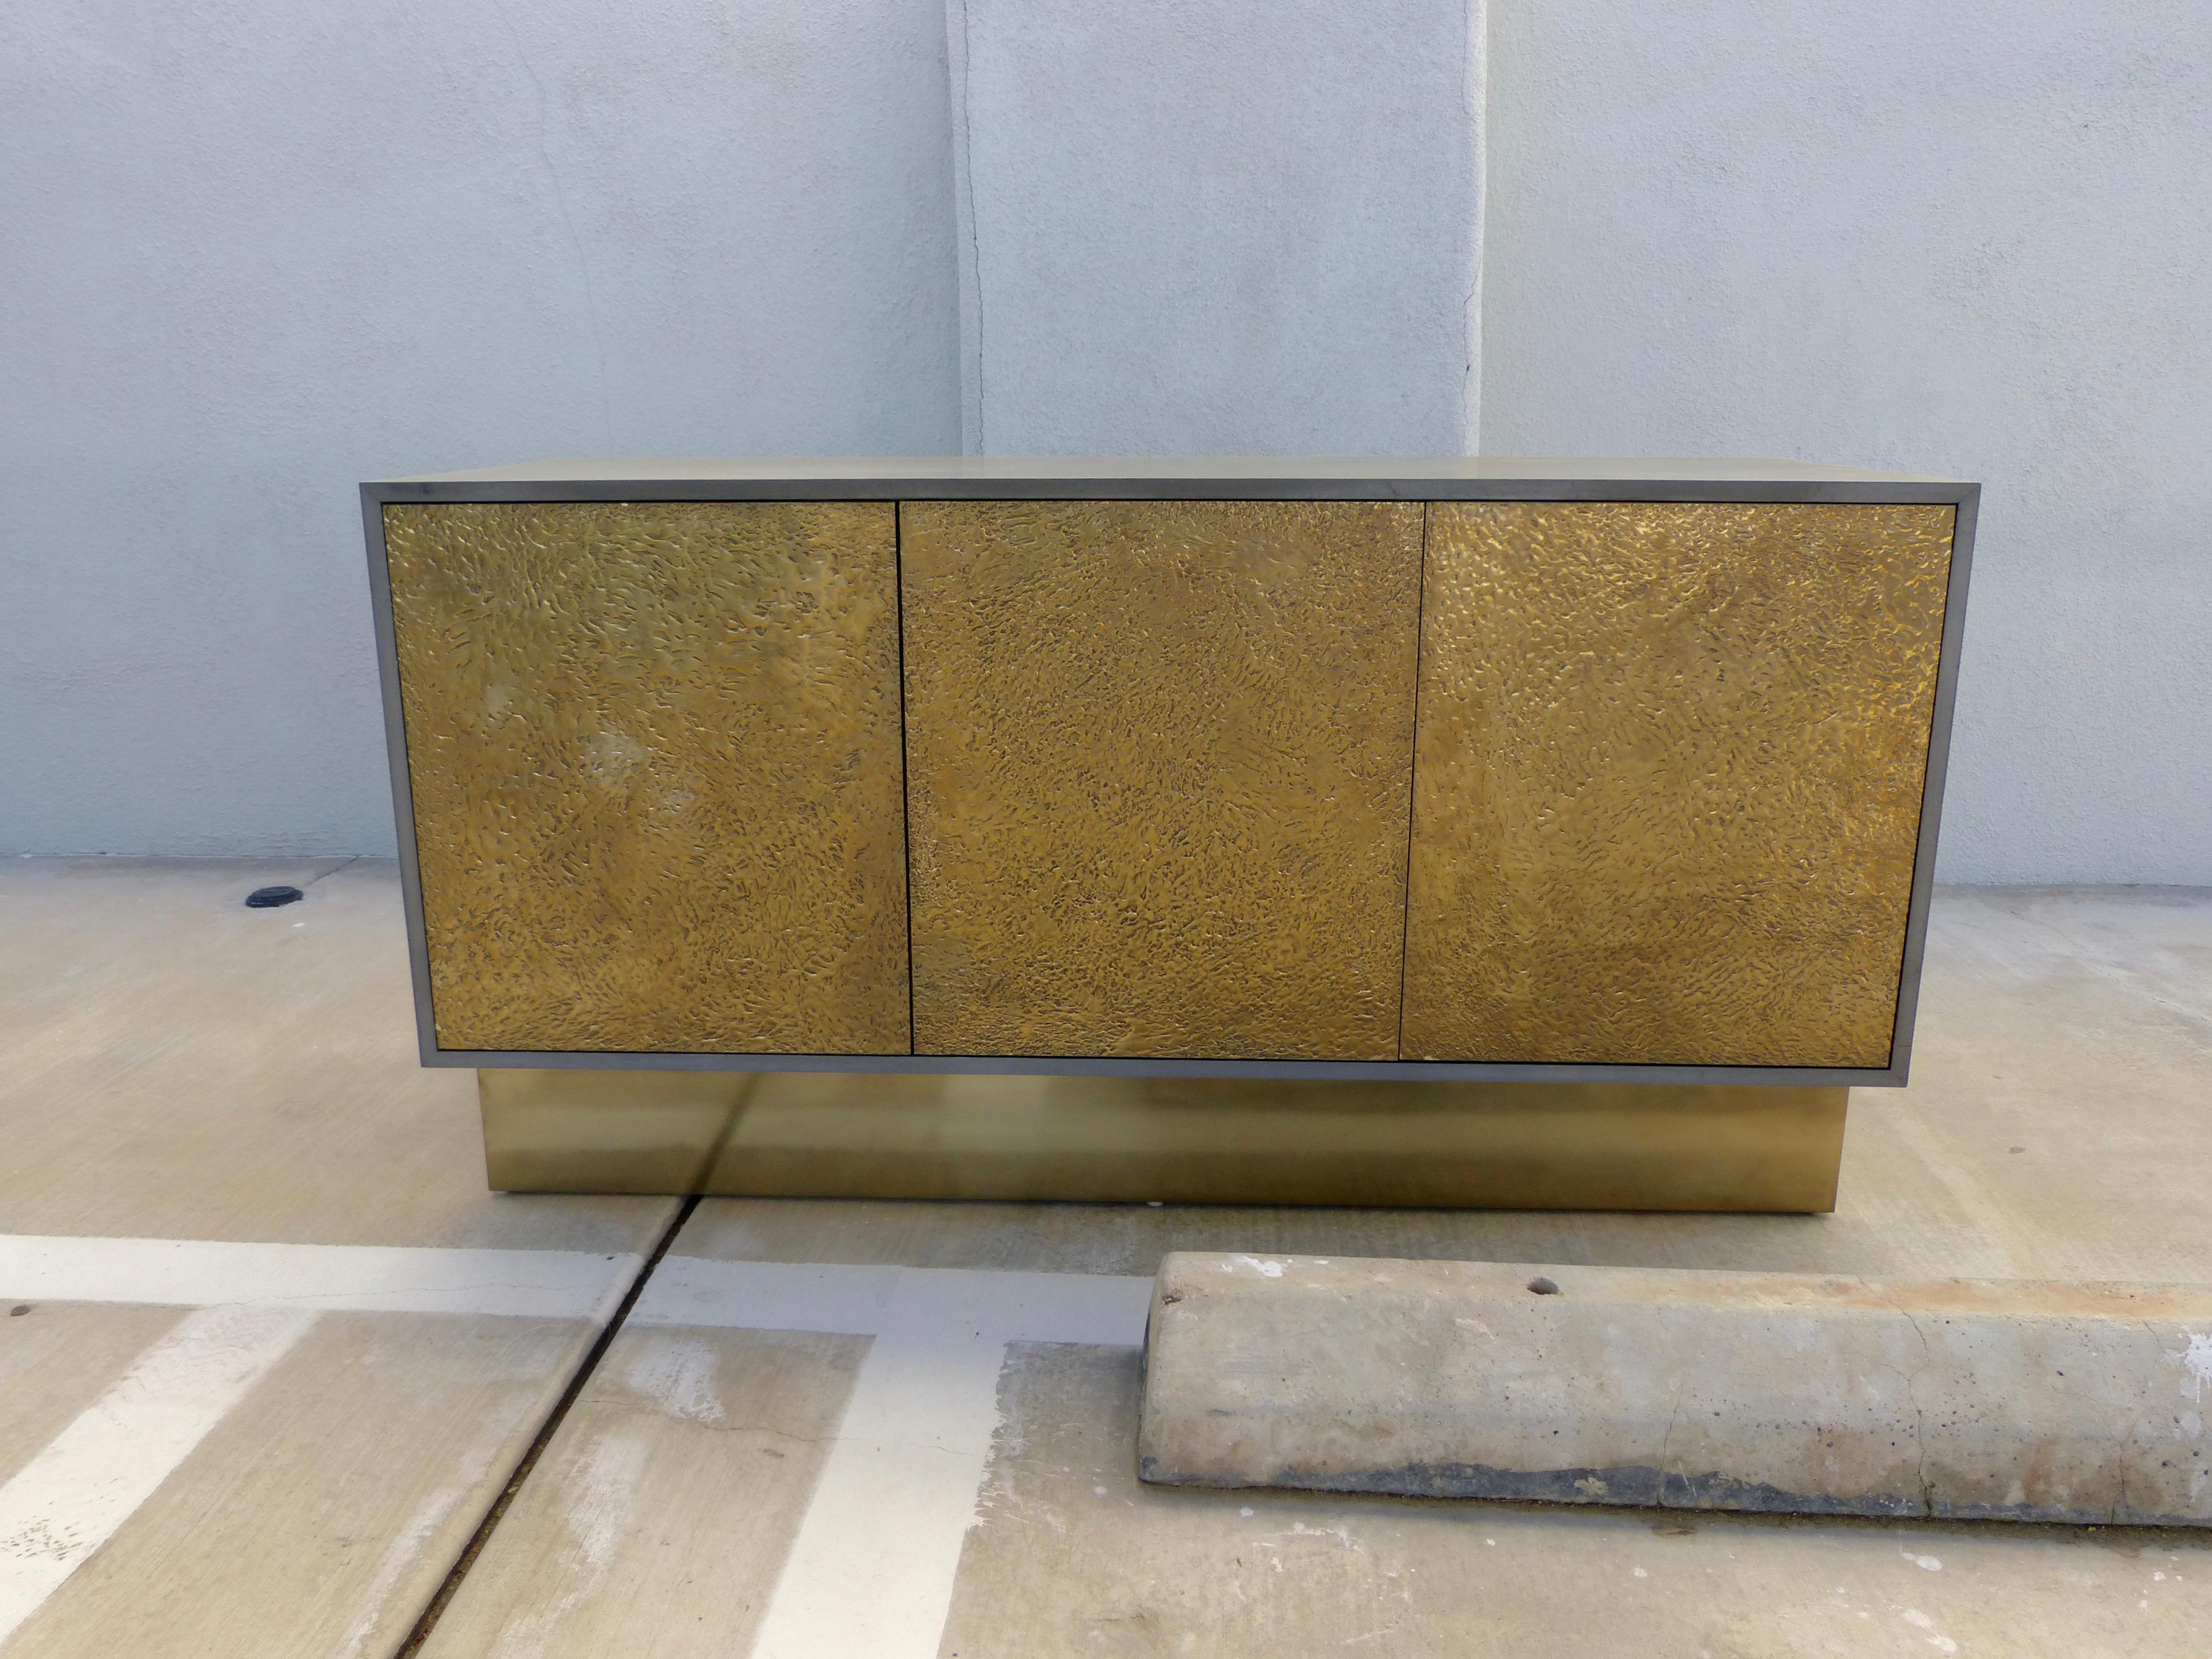 A beautiful bridges over time originals custom made credenza.  It is coated in an iron coating and a brass abstract front. Each section has one shelf. The iron finish has been acid washed to give it a worn 